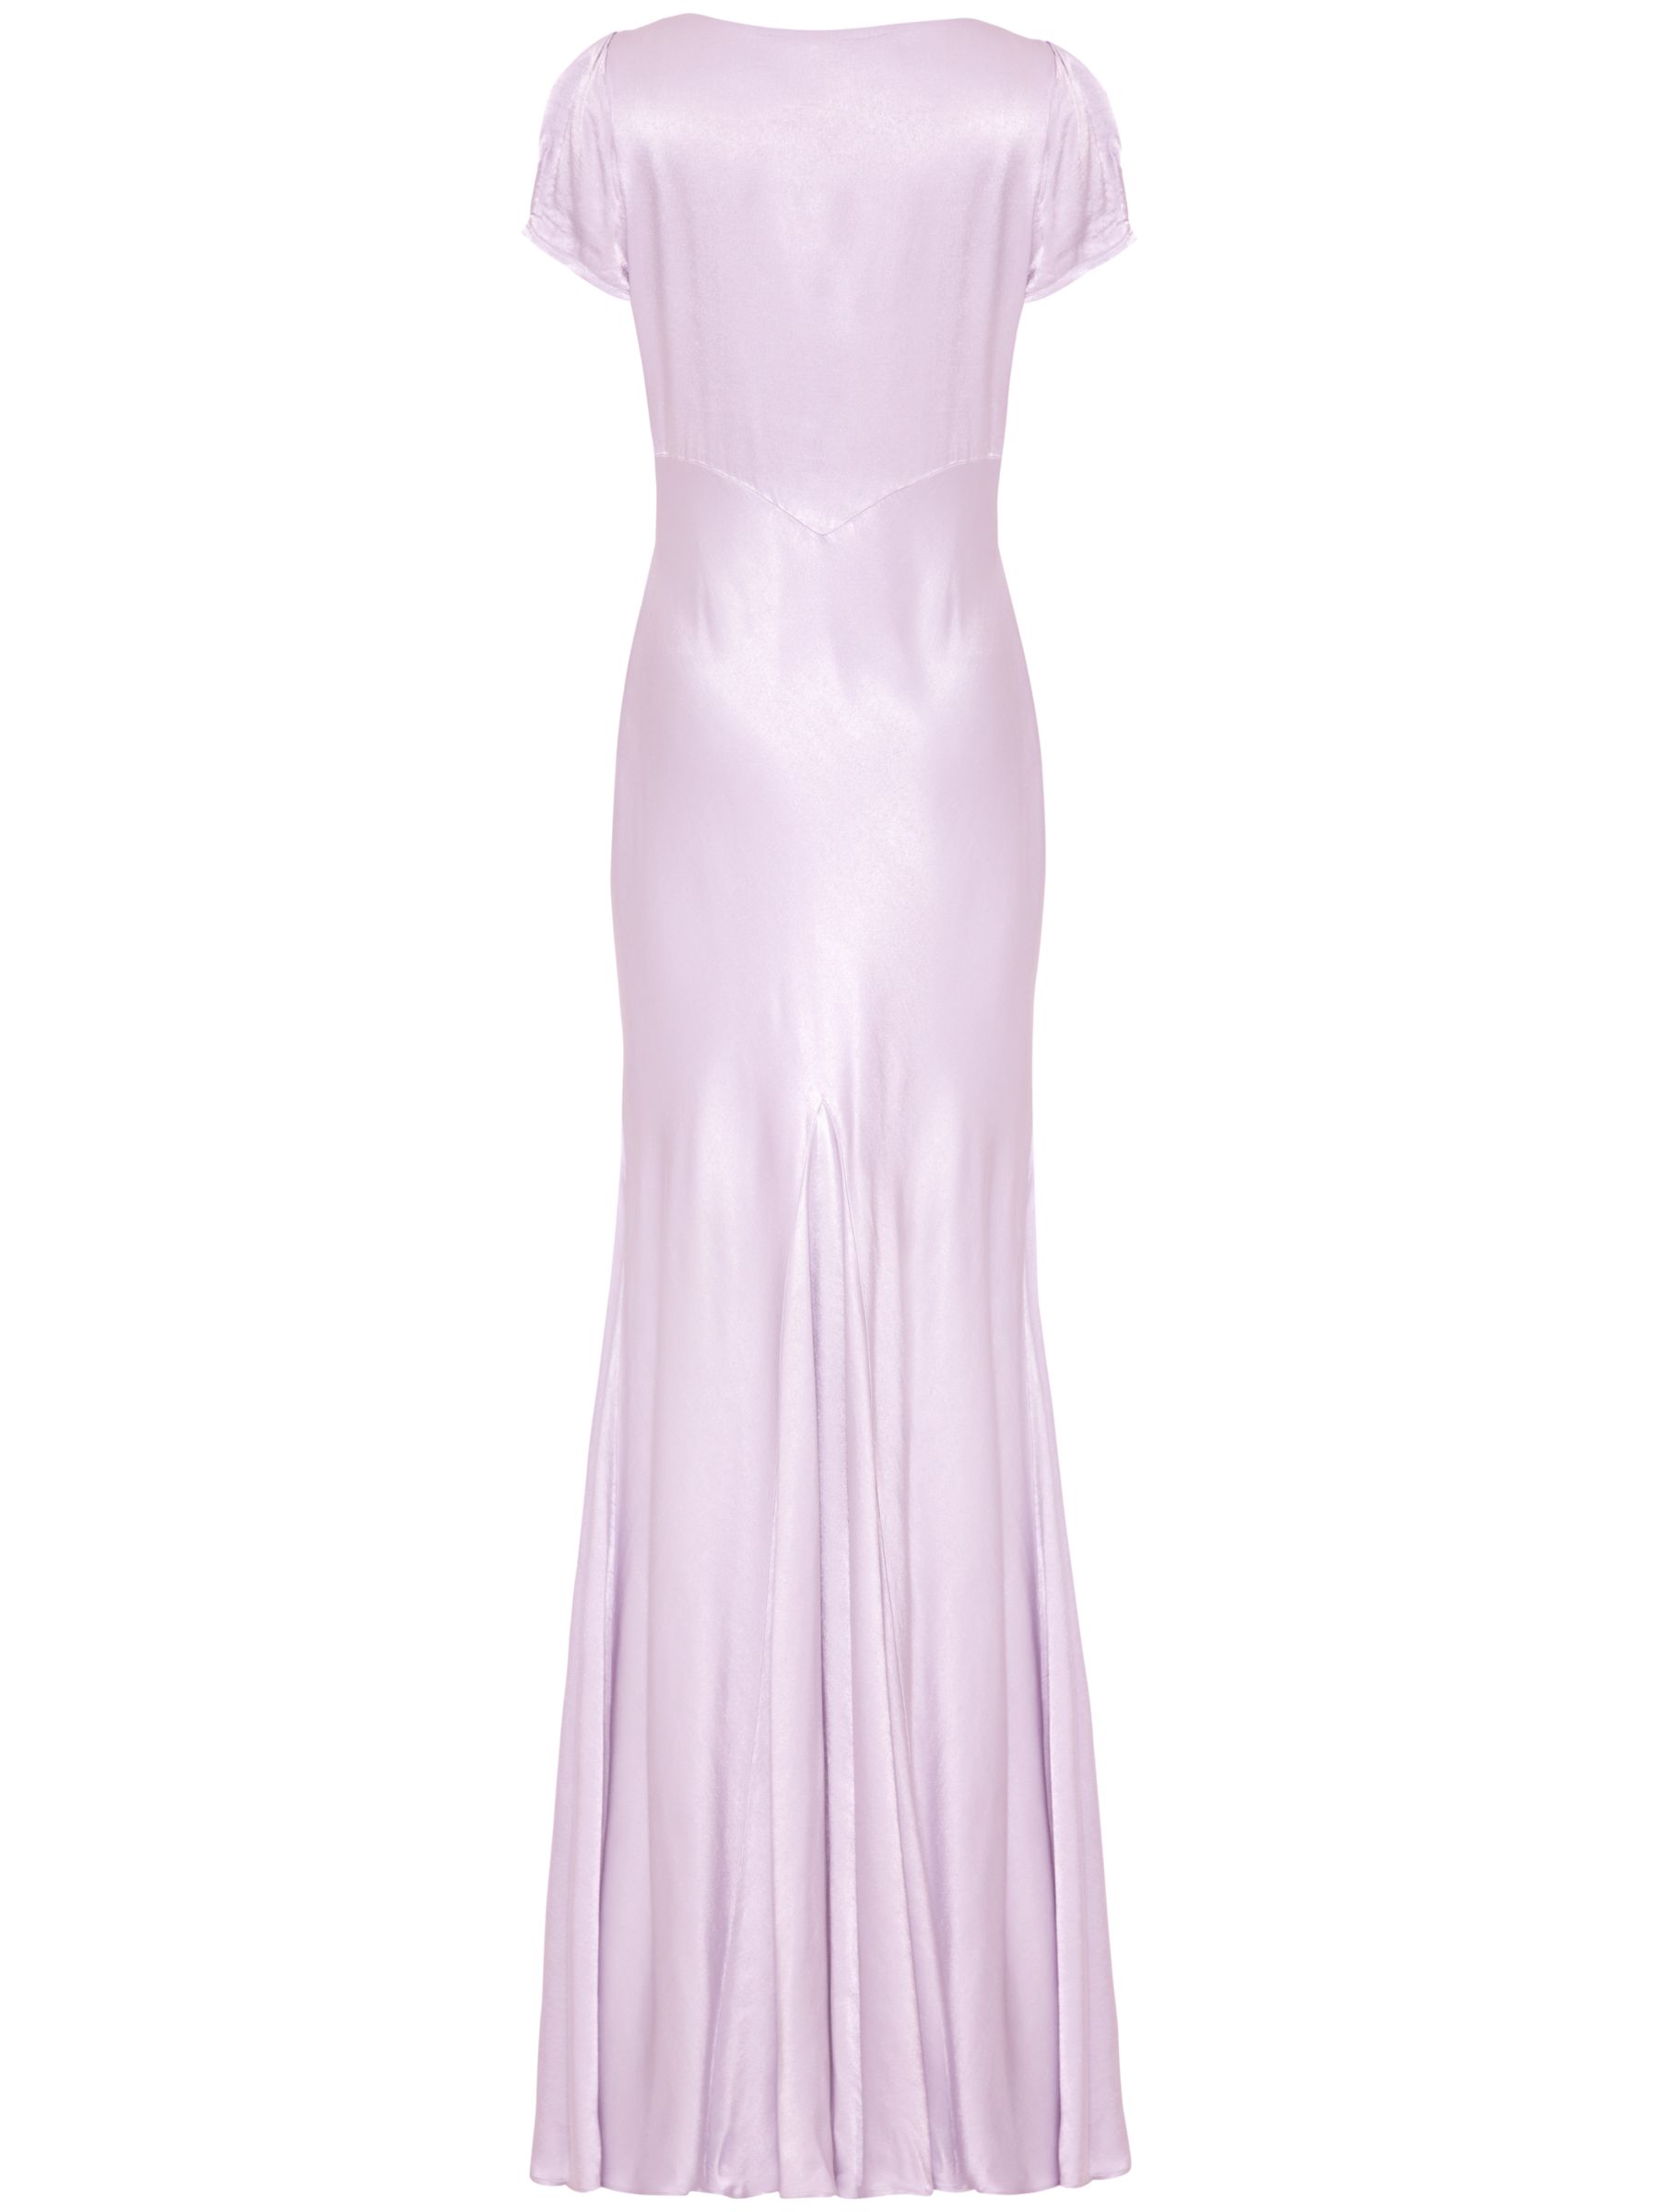 Ghost Charlotte Dress, Lilac